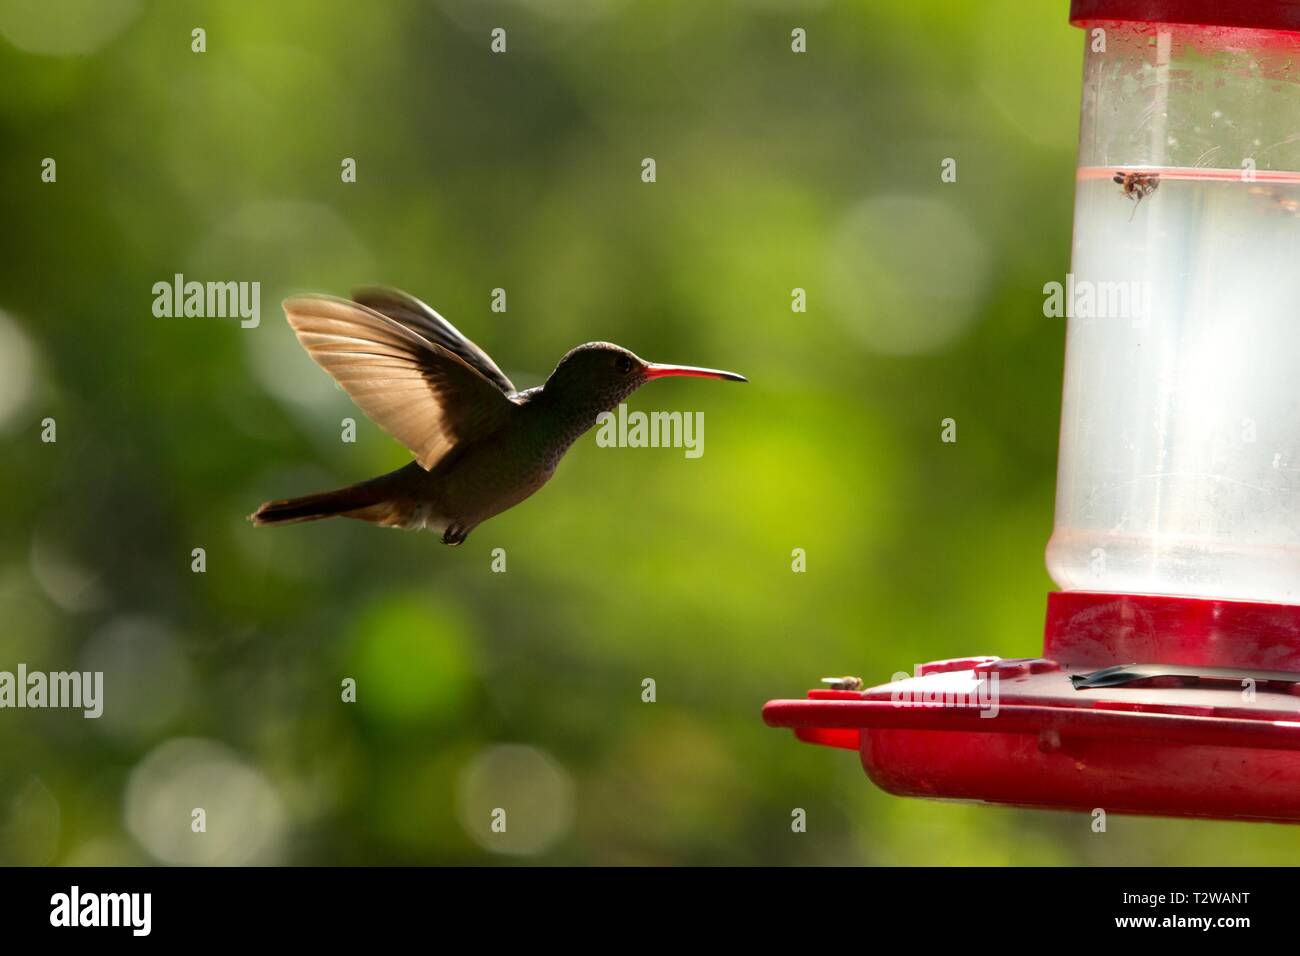 Rufous-tailed hummingbird with outstretched wings,tropical forest,Peru,bird hovering next to red feeder with sugar water, garden,clear background,natu Stock Photo